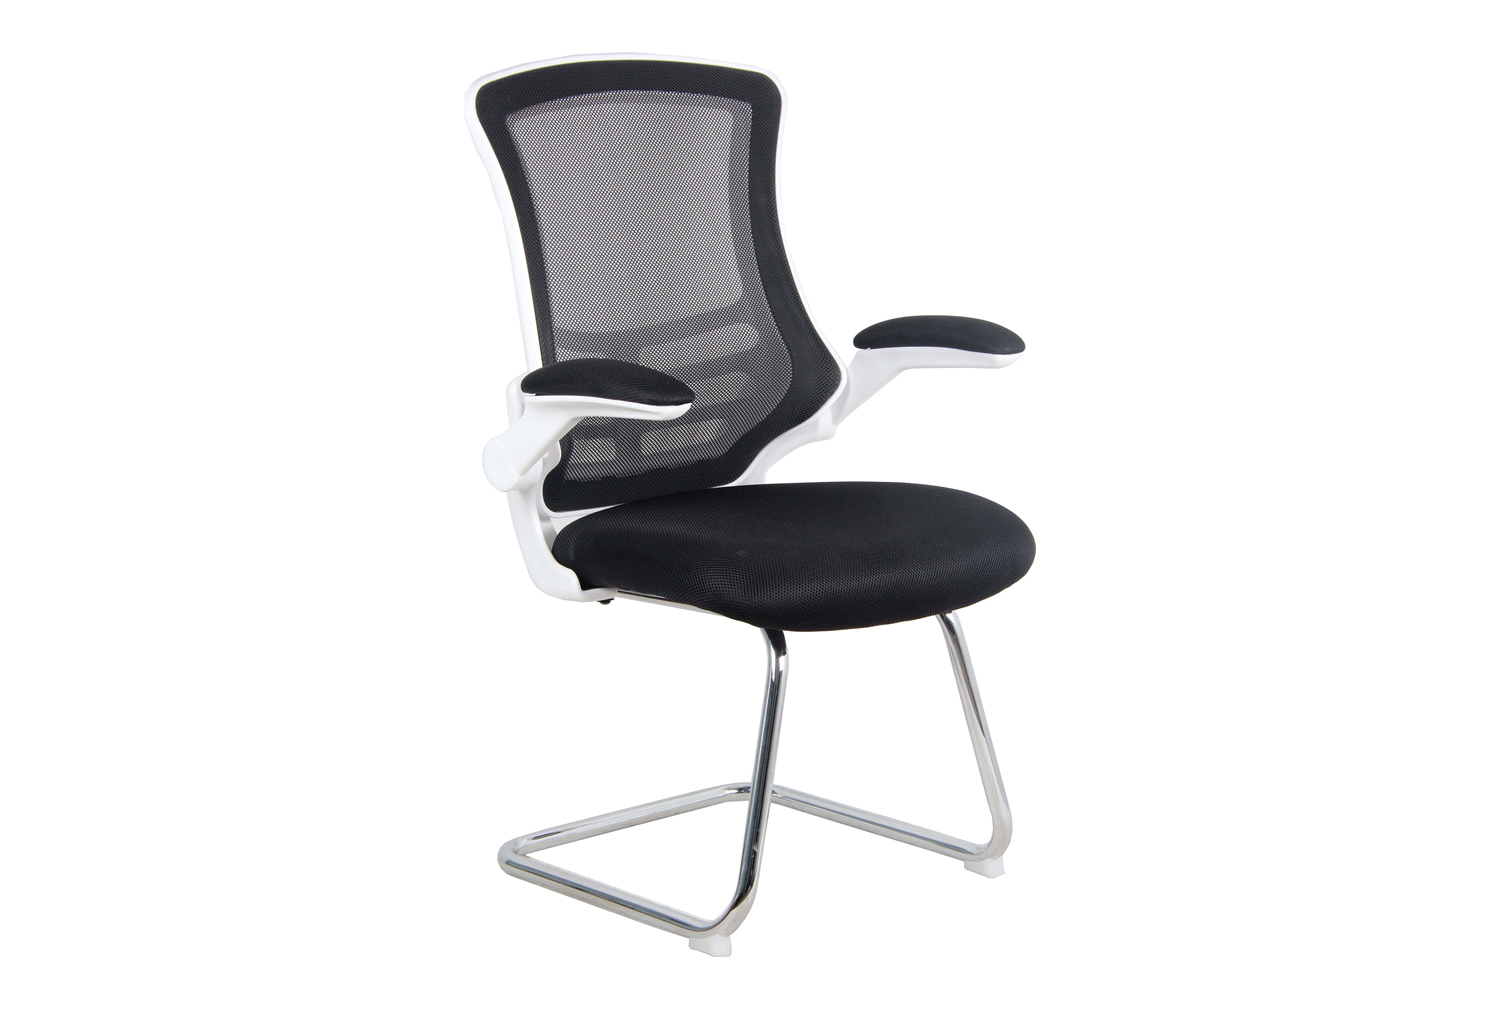 Moon Mesh Back Visitor Office Chair With Chrome Frame (Black), Express Delivery